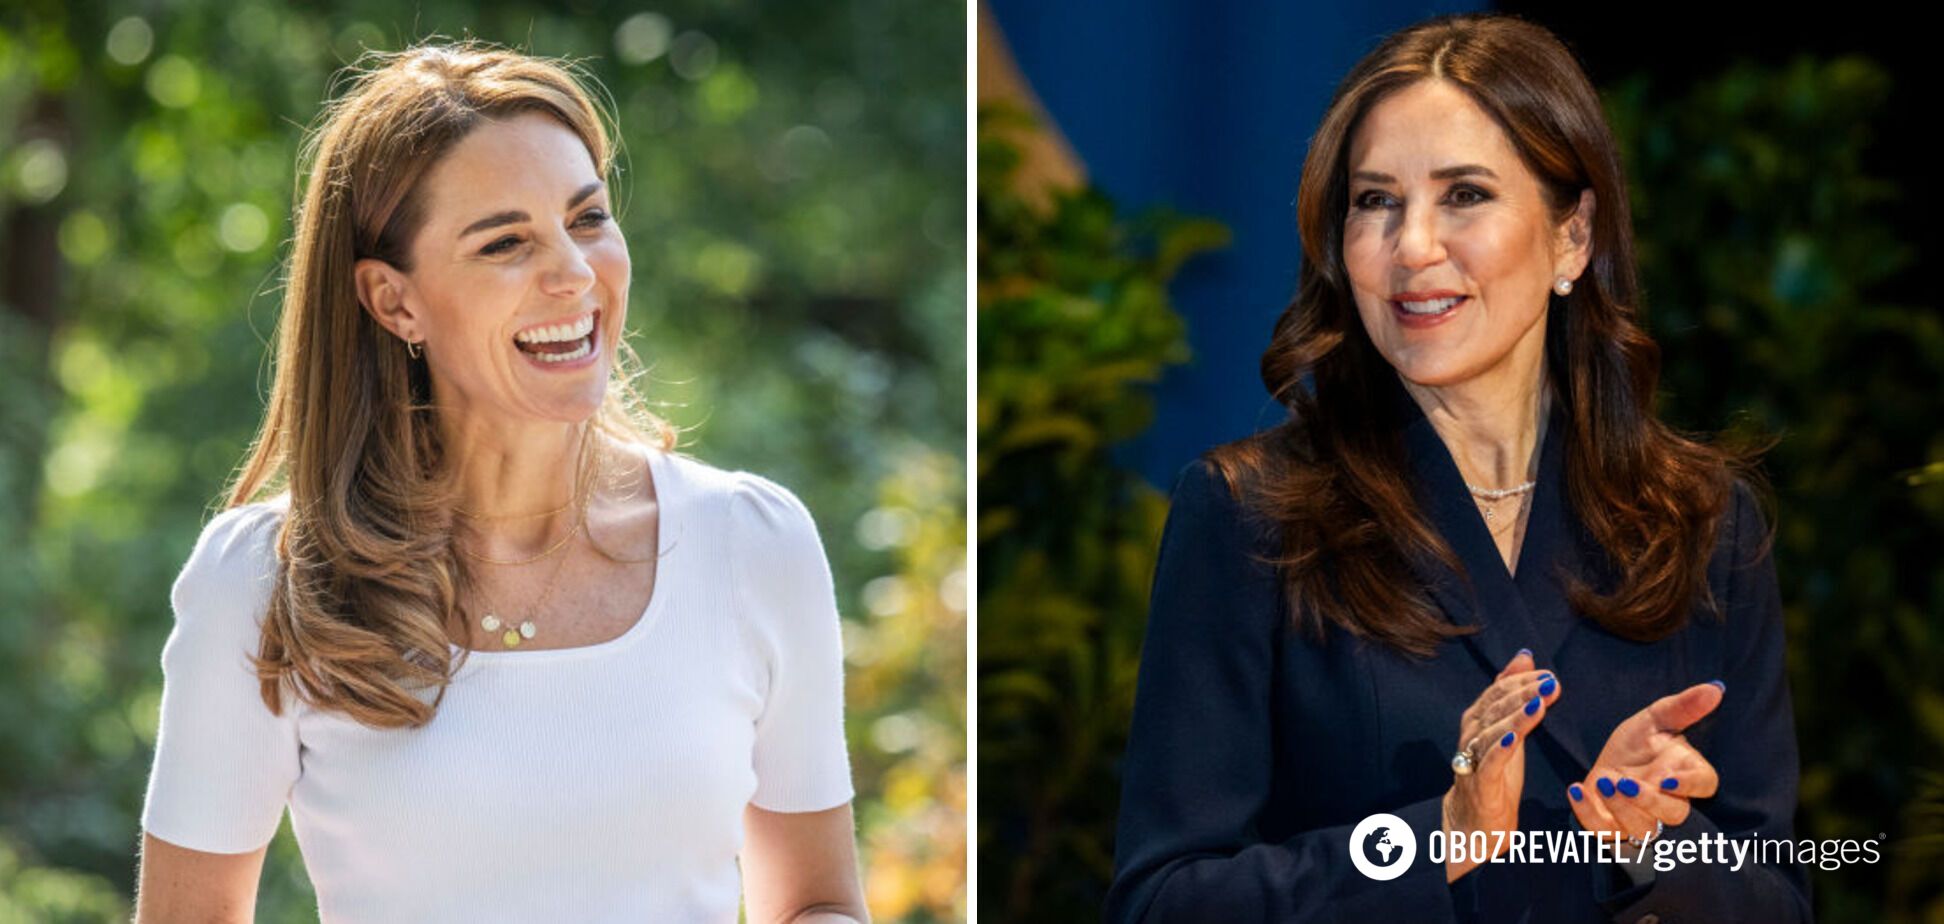 From hairstyle to manicure that breaks the rules. 8 times the Queen of Denmark copied Kate Middleton's look